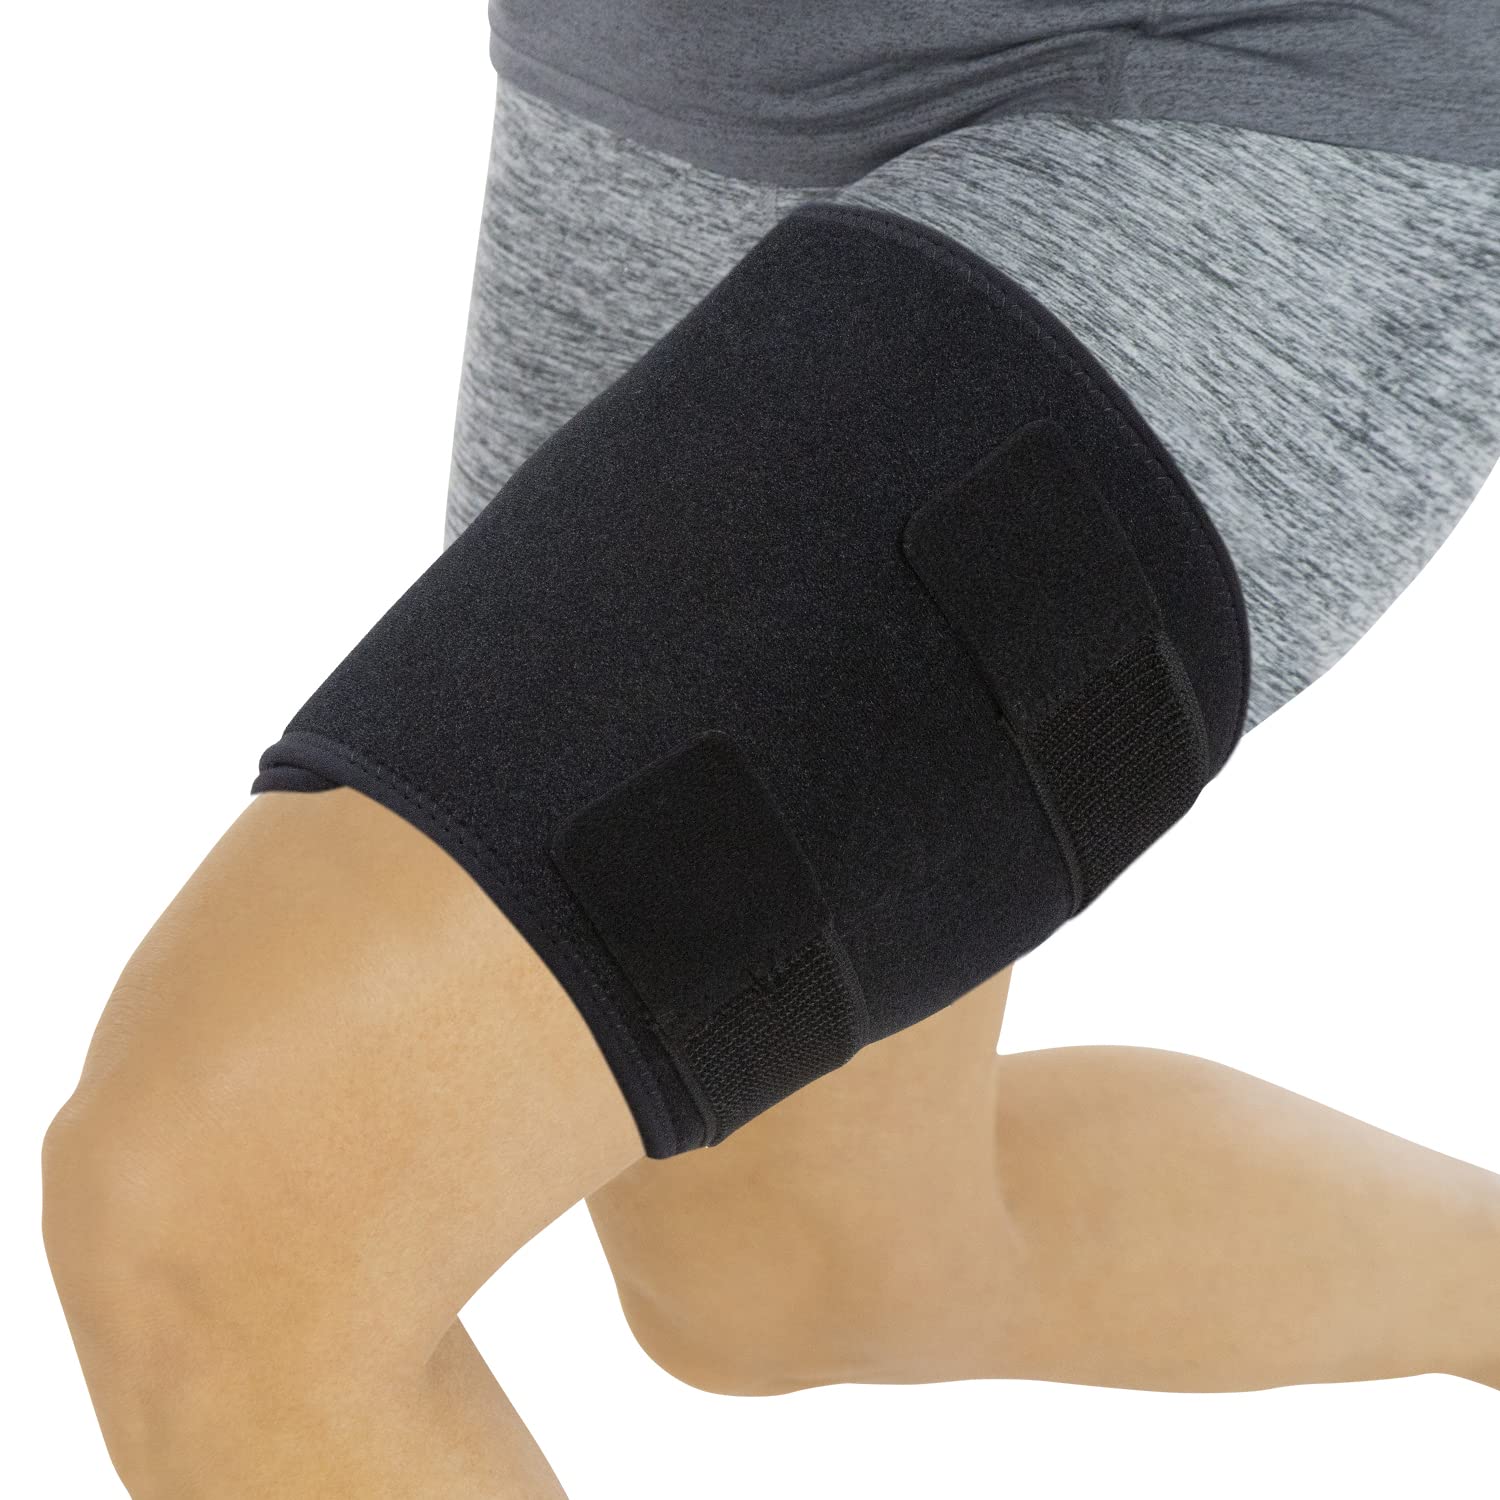 Vive Thigh Brace - Hamstring Quad Wrap - Adjustable Compression Sleeve  Support for Pulled Groin Muscle Sprains Quadricep Tendinitis Workouts  Sciatica Pain and Sports Recovery - Men Women (Black)